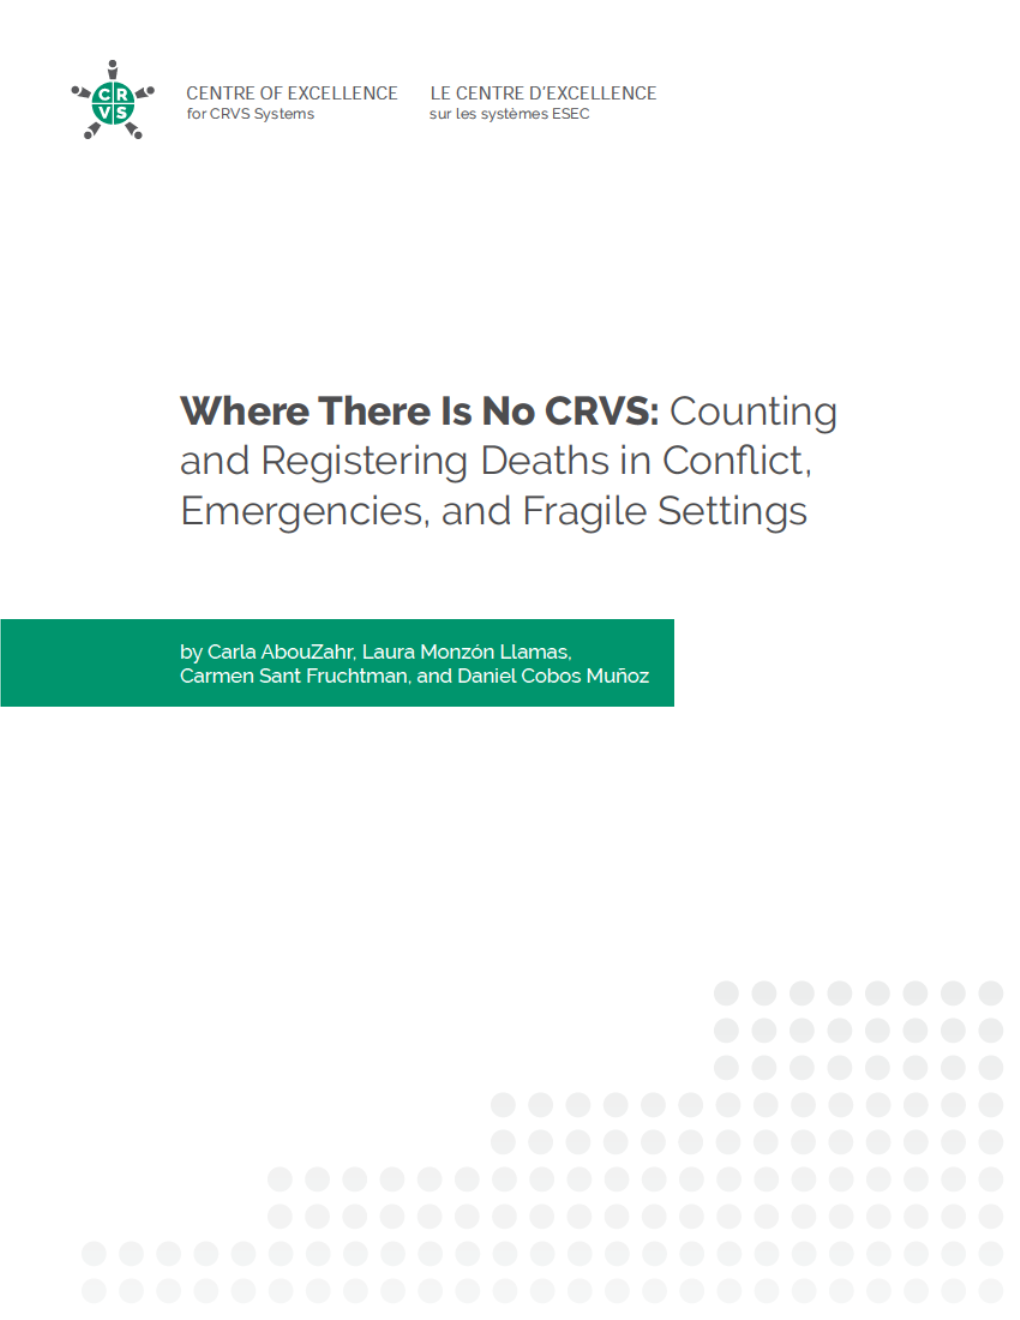 Where There Is No CRVS: Countingand Registering Deaths in Conflict, Emergencies, and Fragile Settings